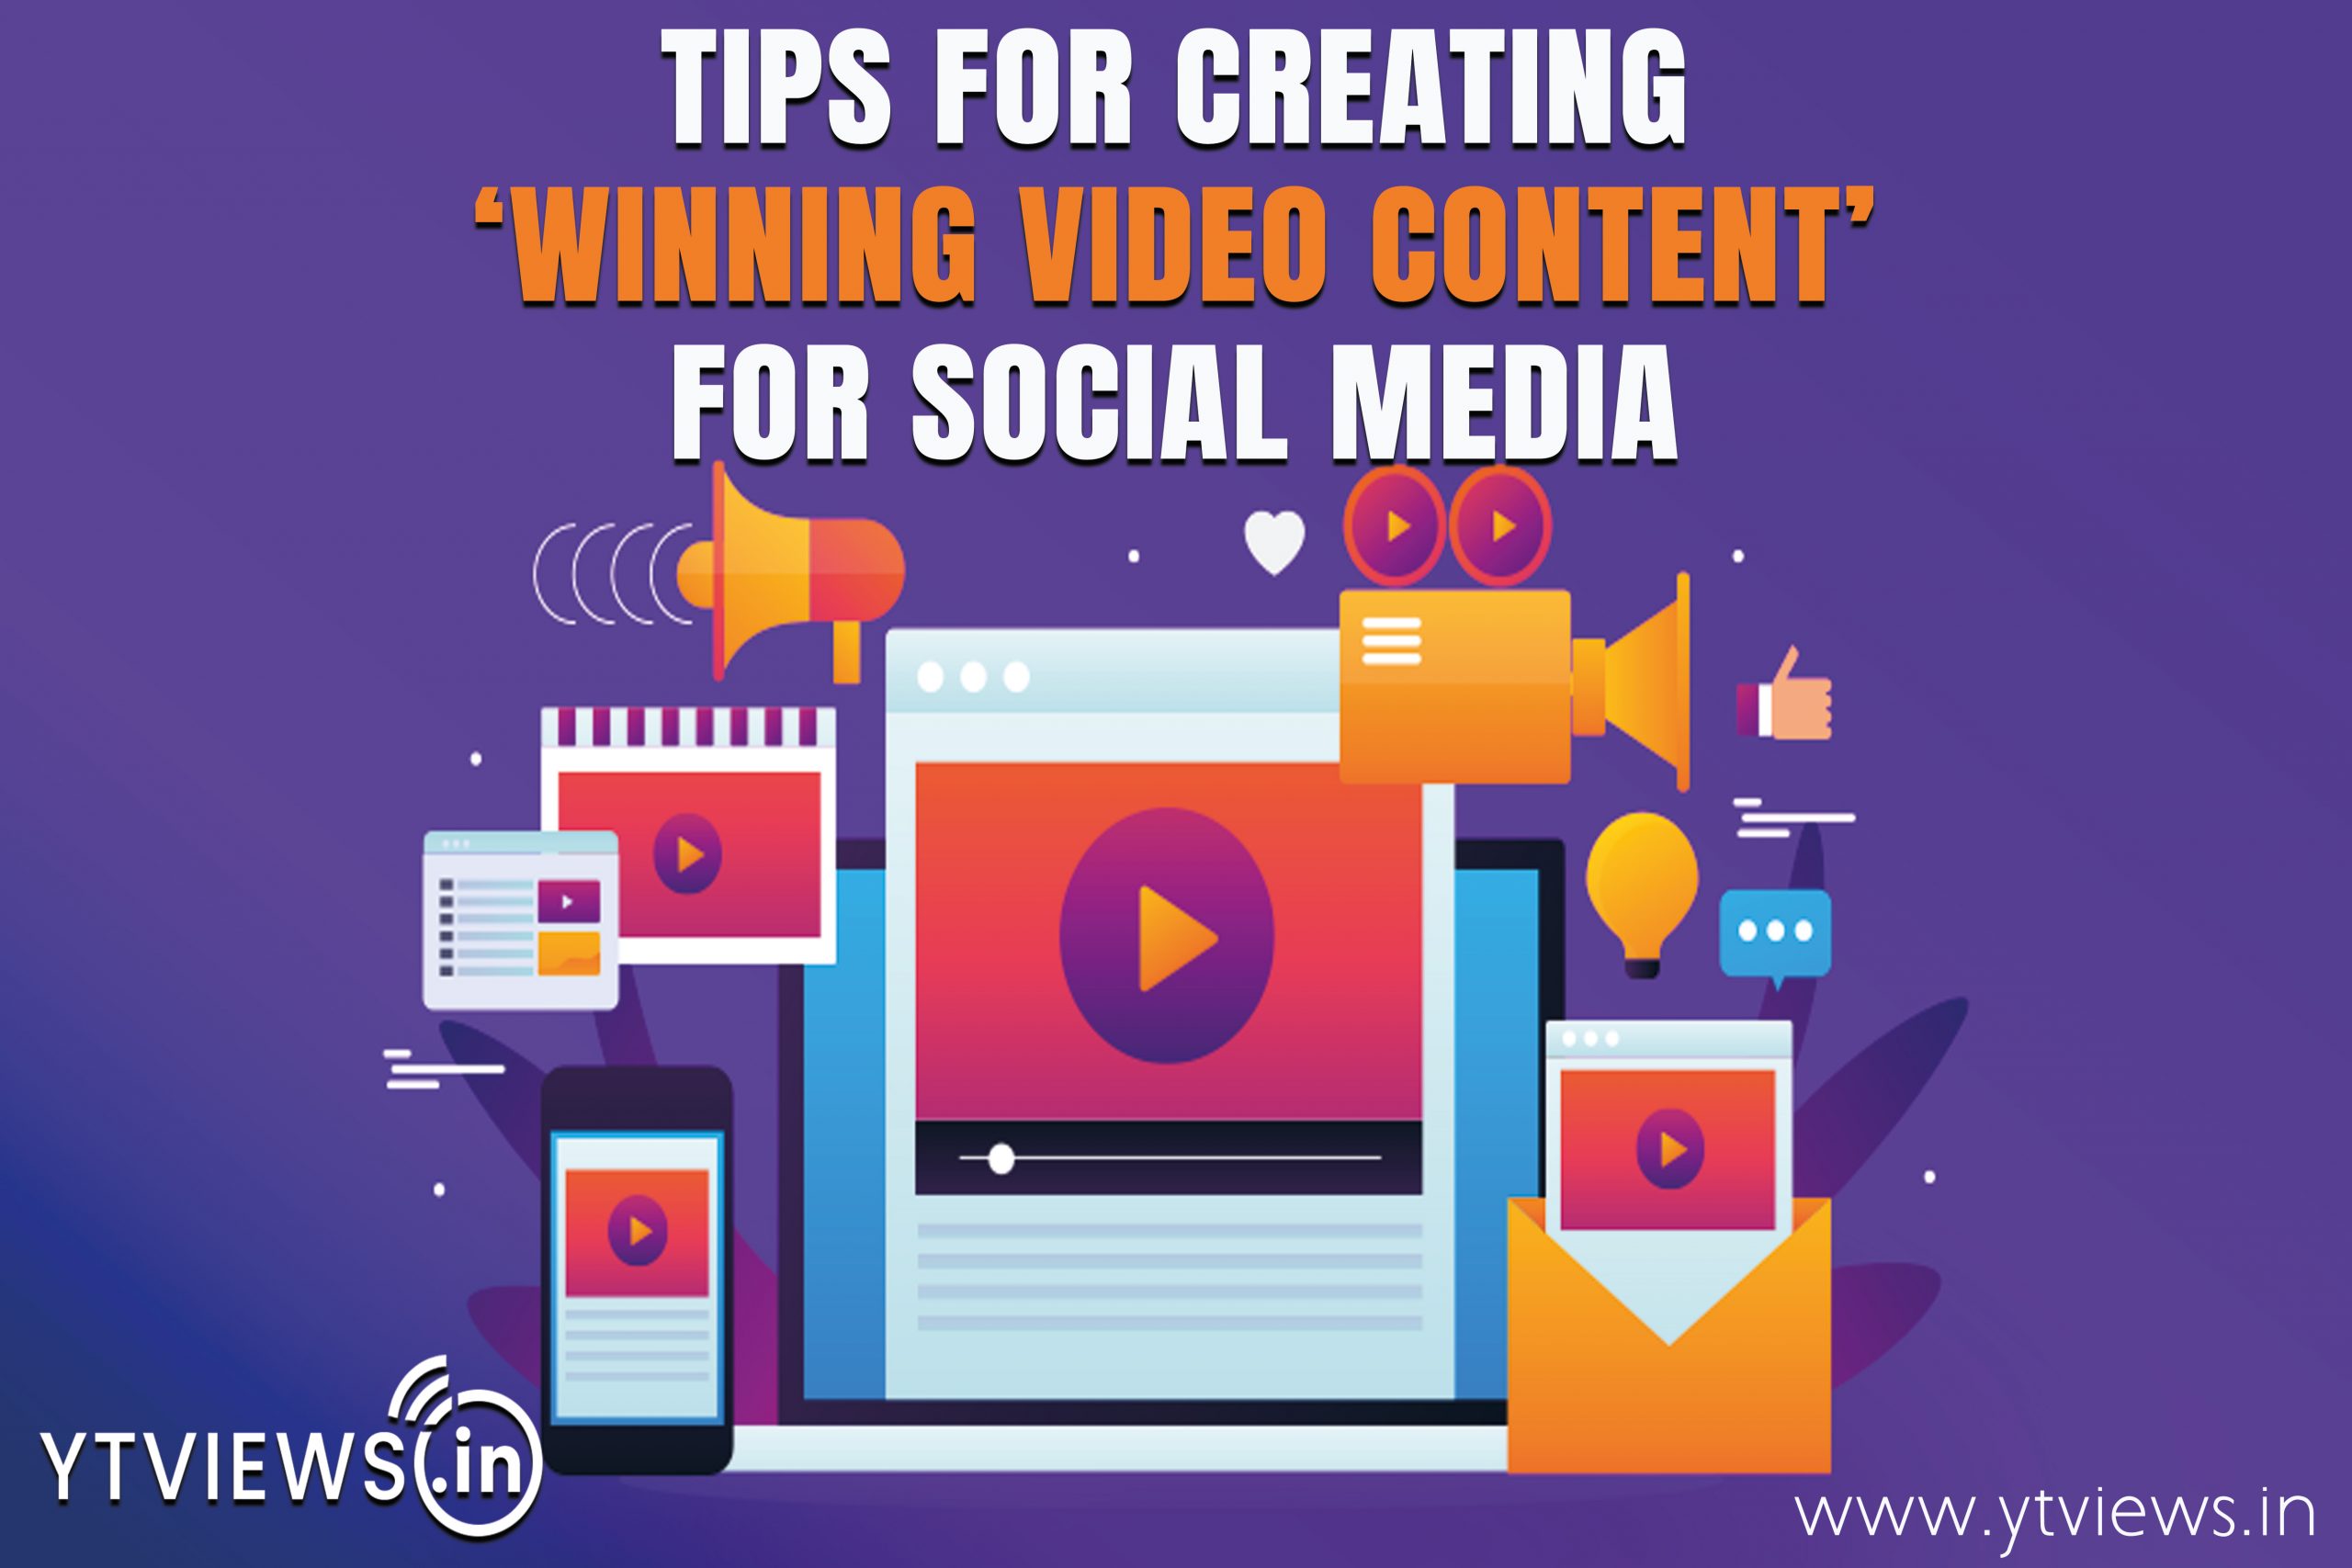 Tips for creating winning video content for social media